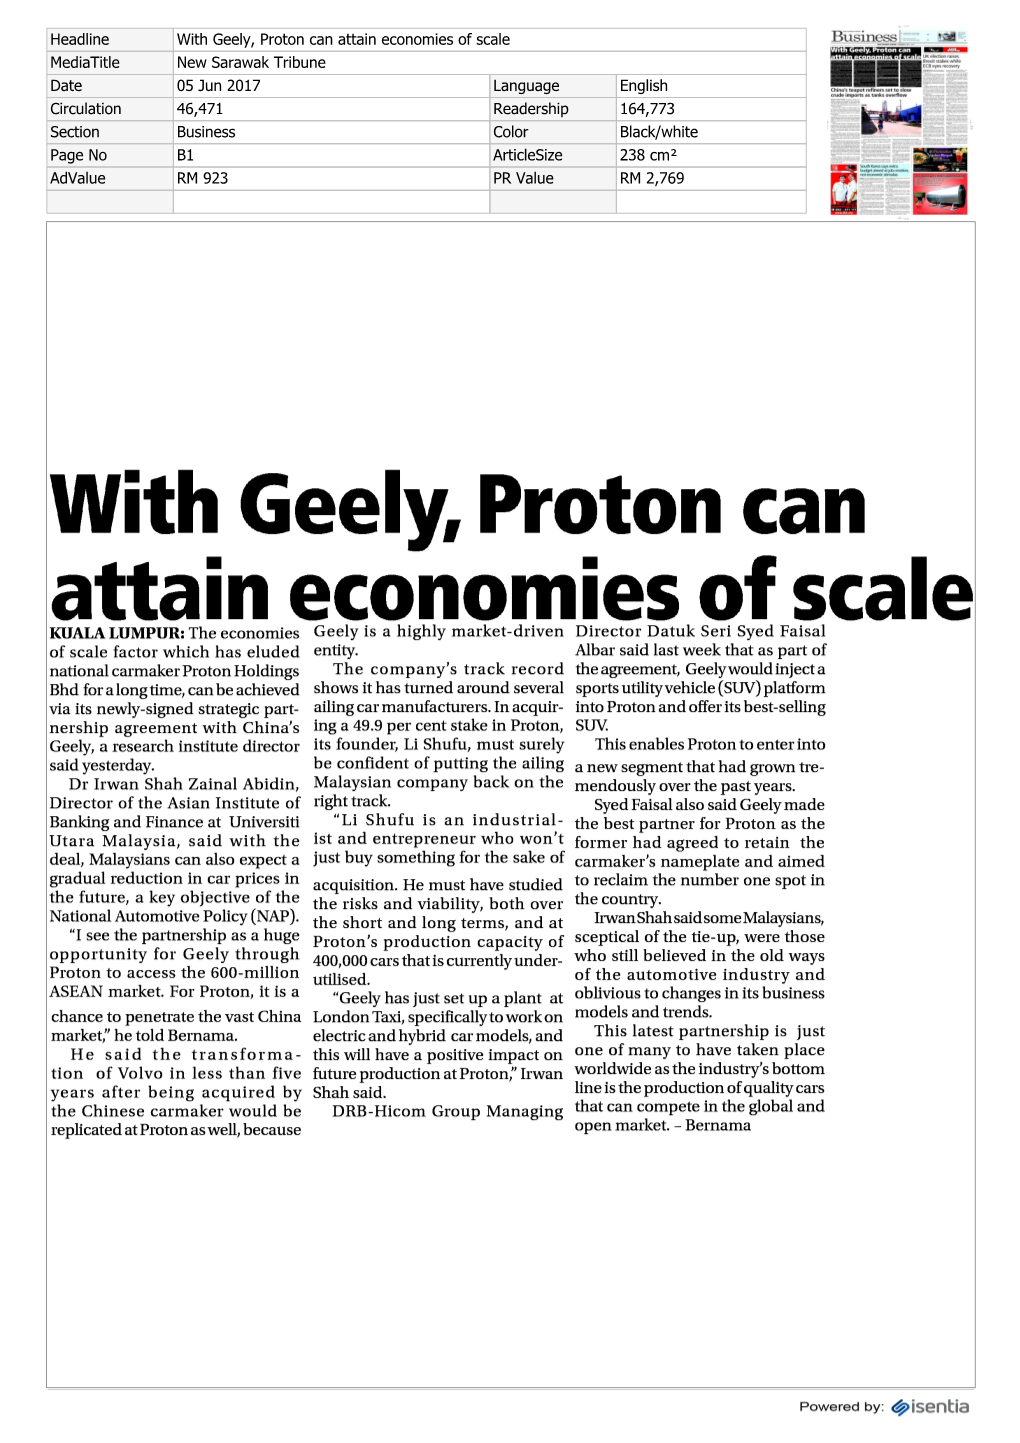 With Geely, Proton